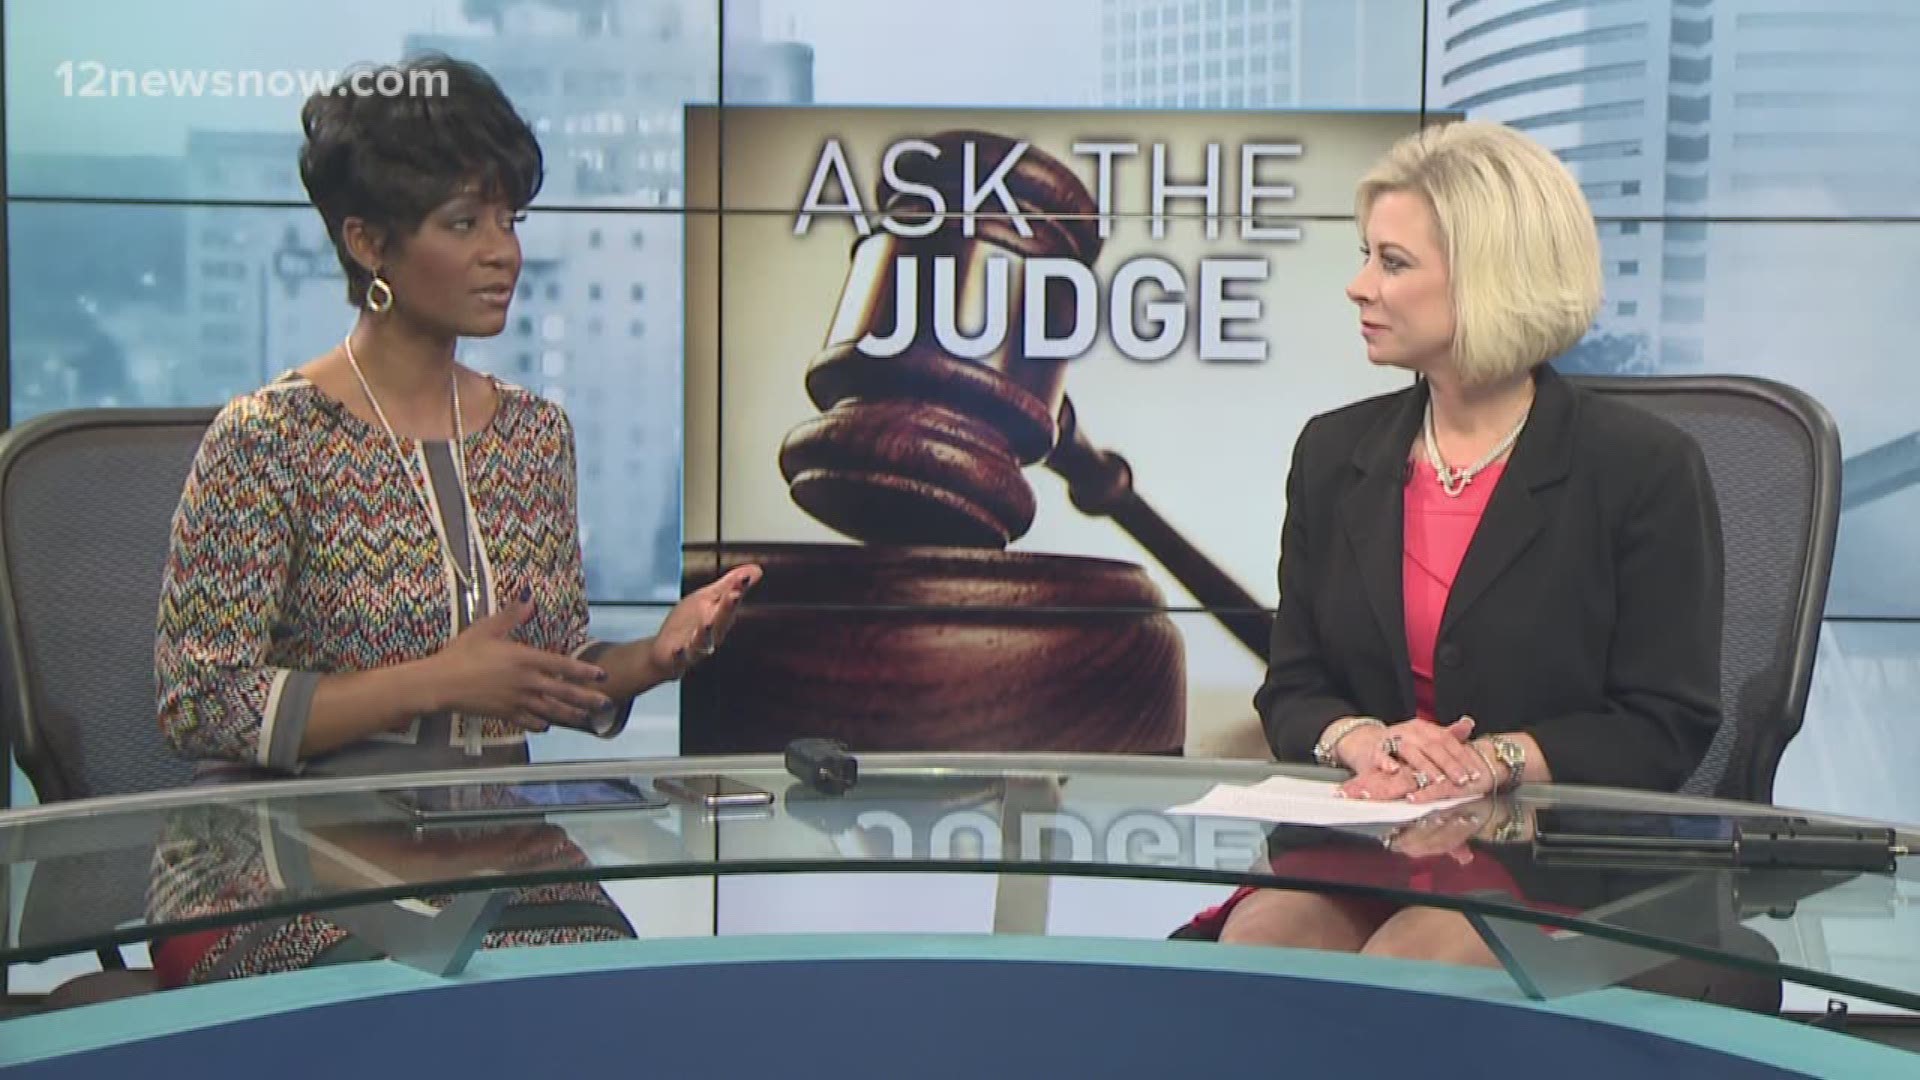 Today we 'Ask the Judge,' Can I be jailed for failure to have car insurance?